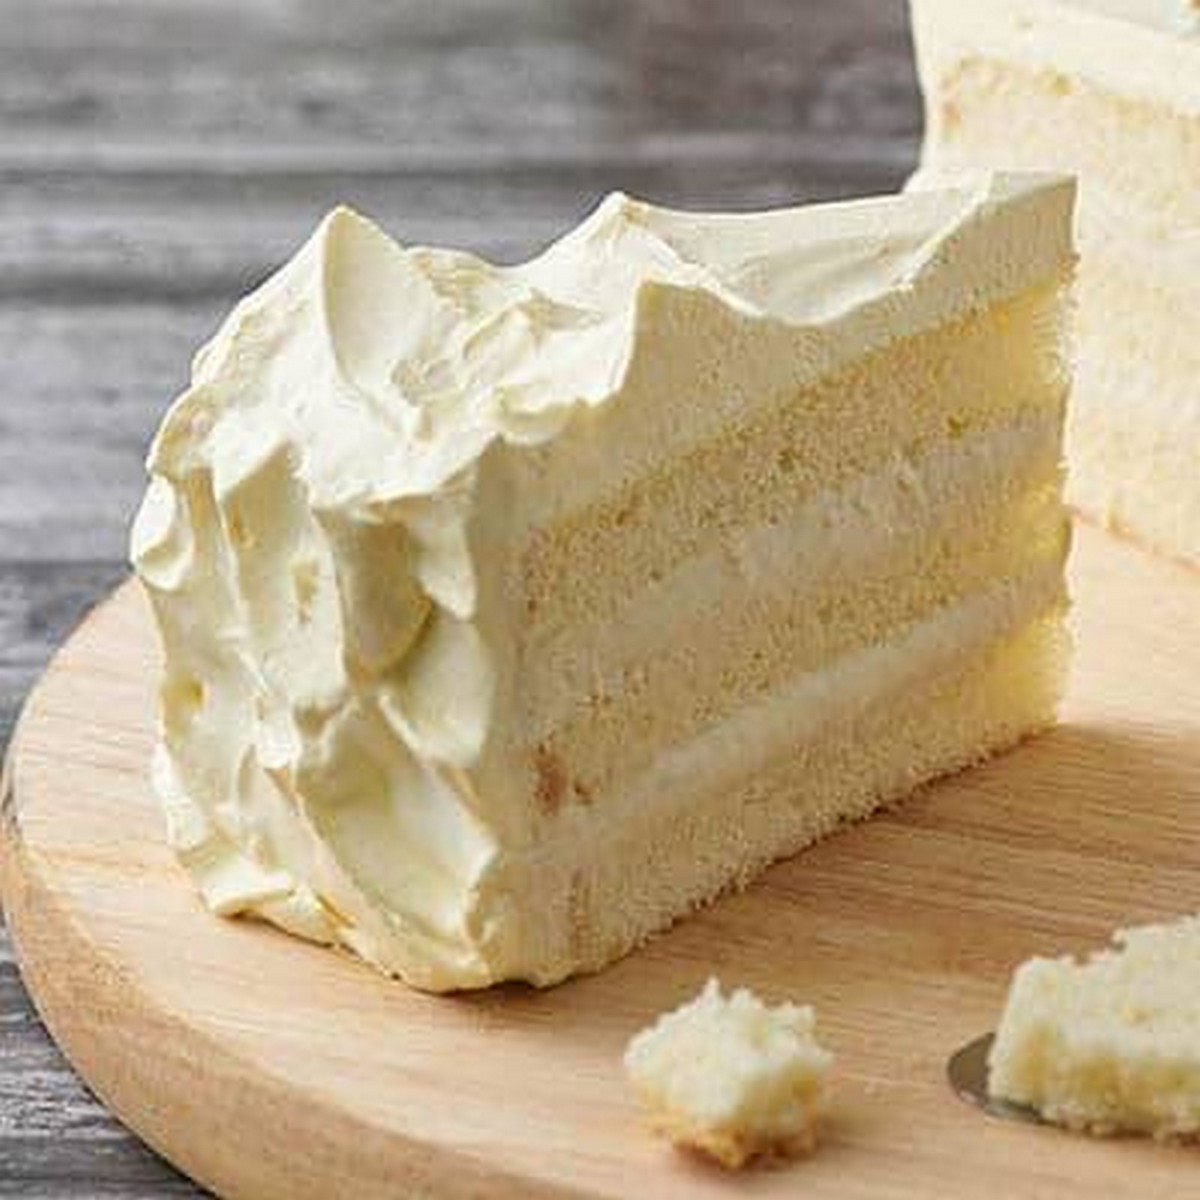 5.-2-durian-cakes-Absolute-Durian-Durian-Fromage - LifeStyle 